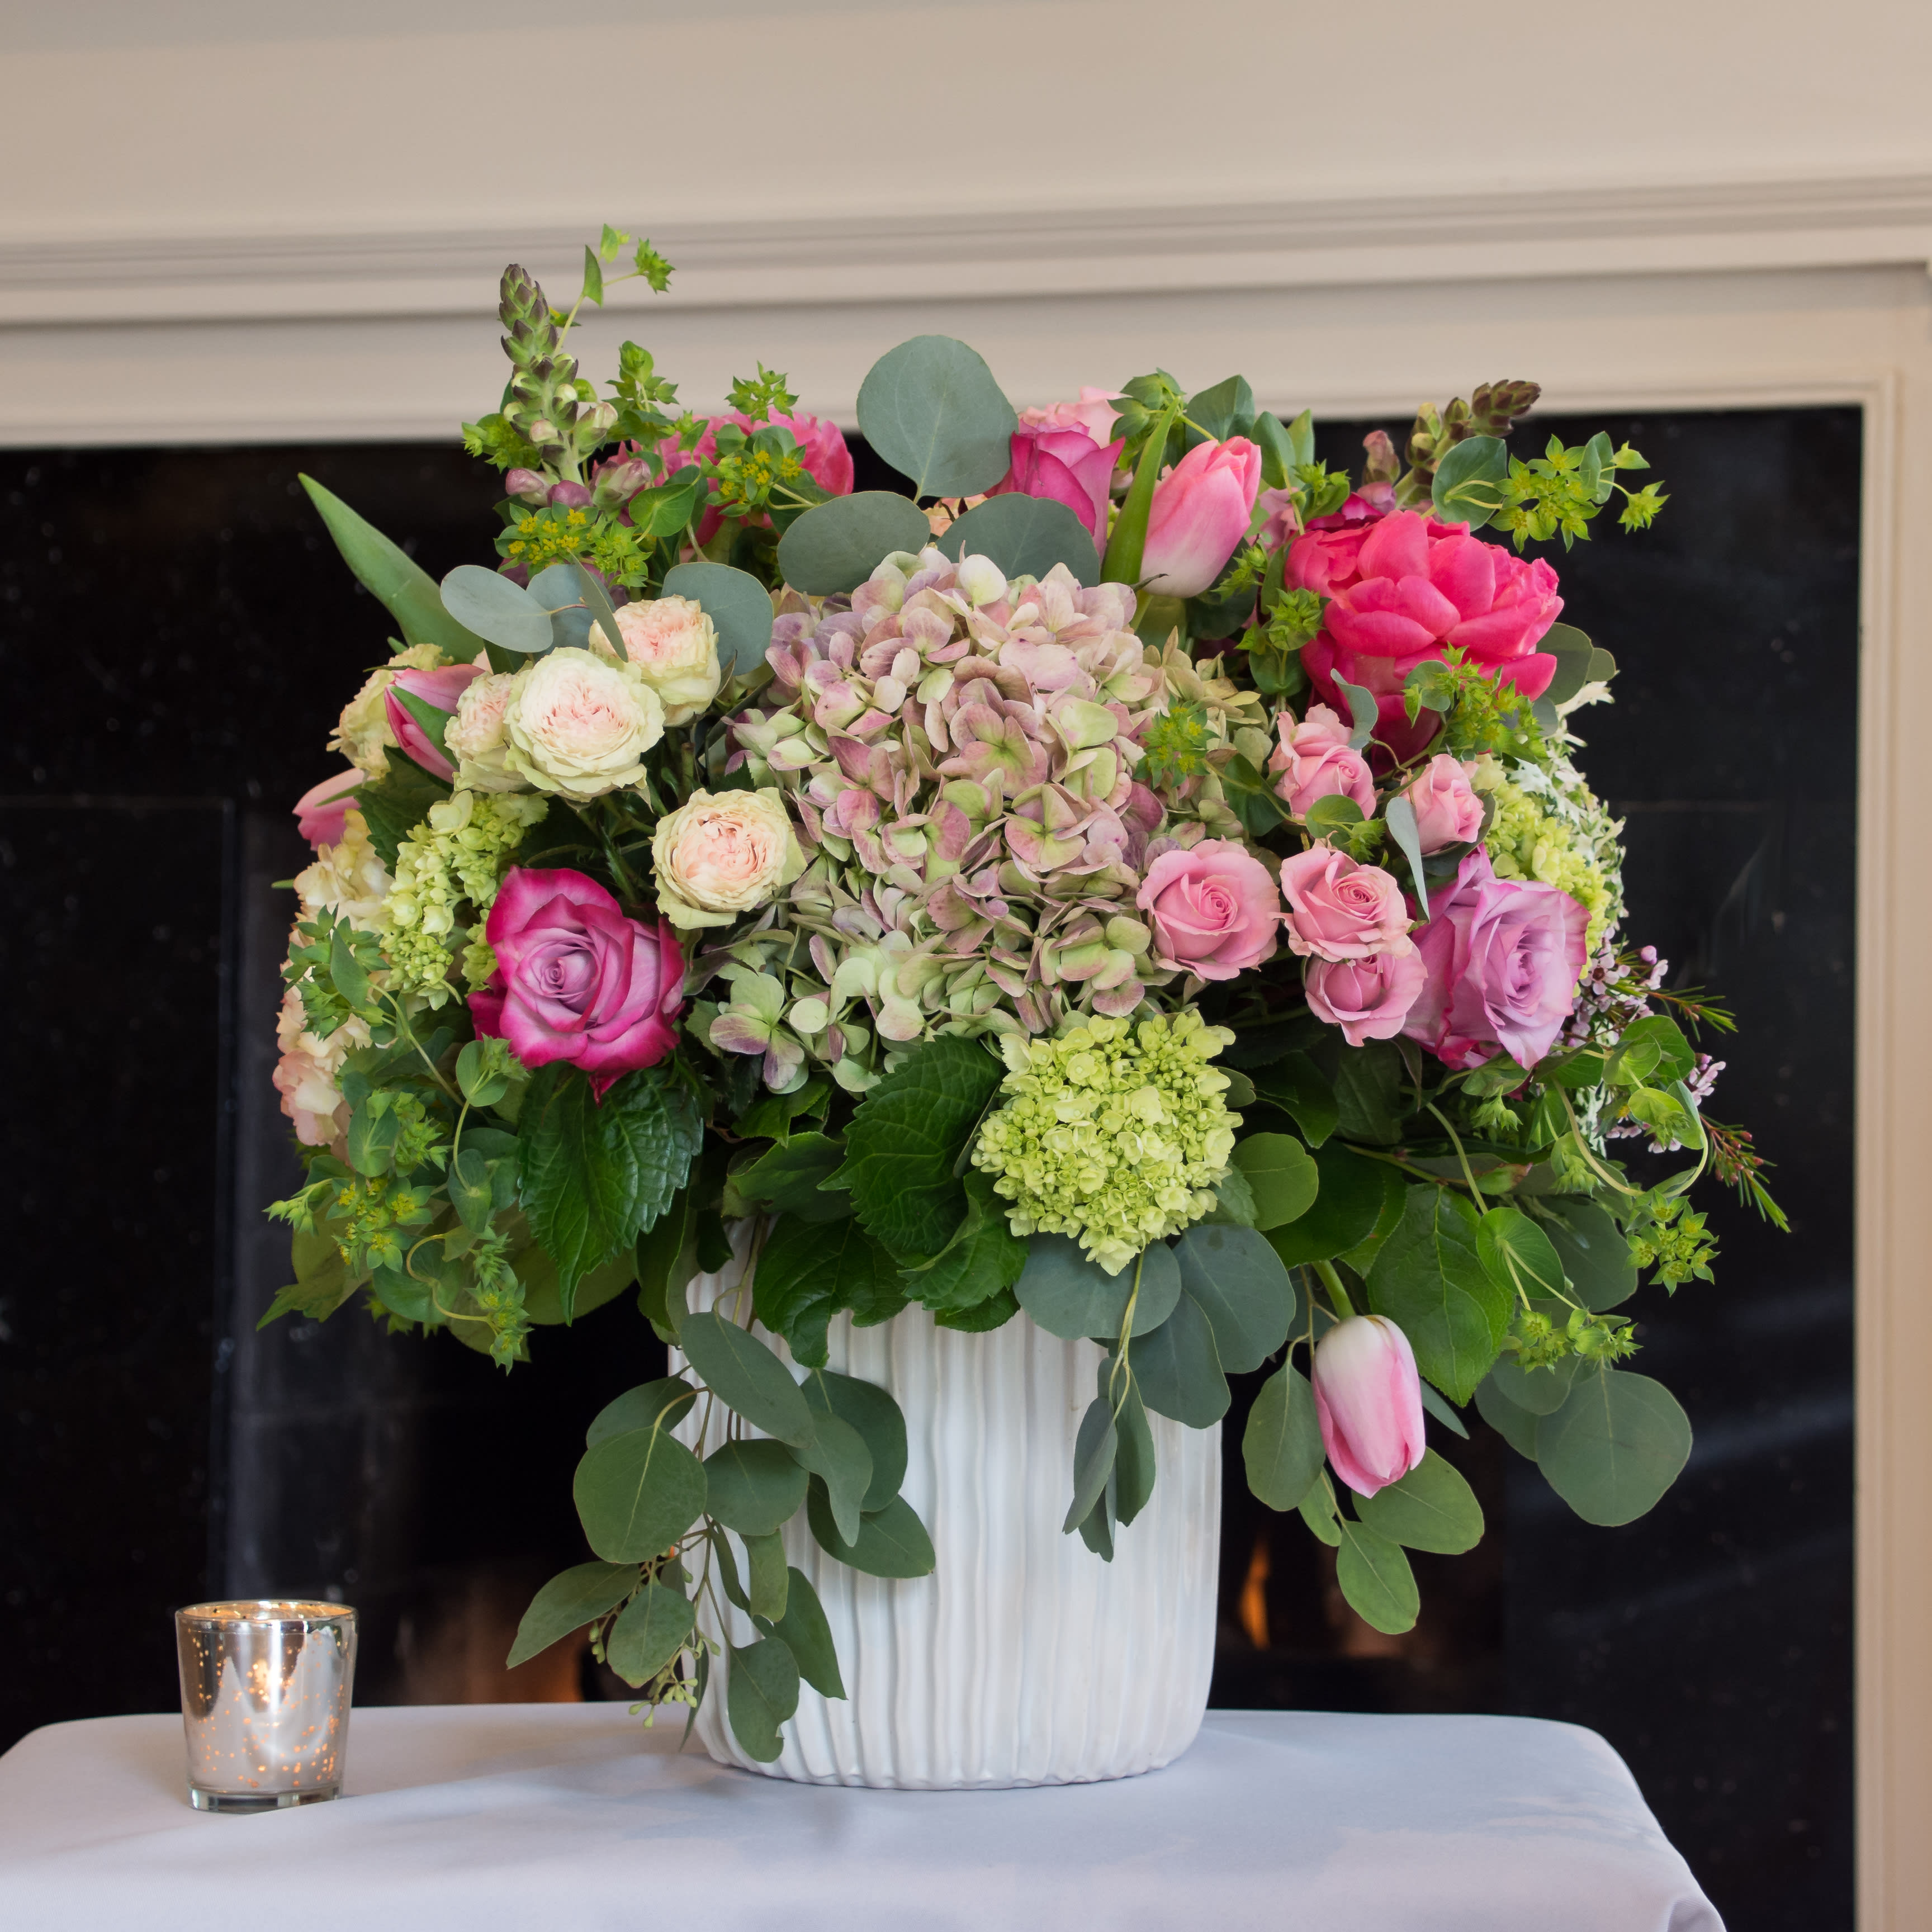 Garden of Elegance - Stunning design of pink and green florals textured with fuchsia and lavender